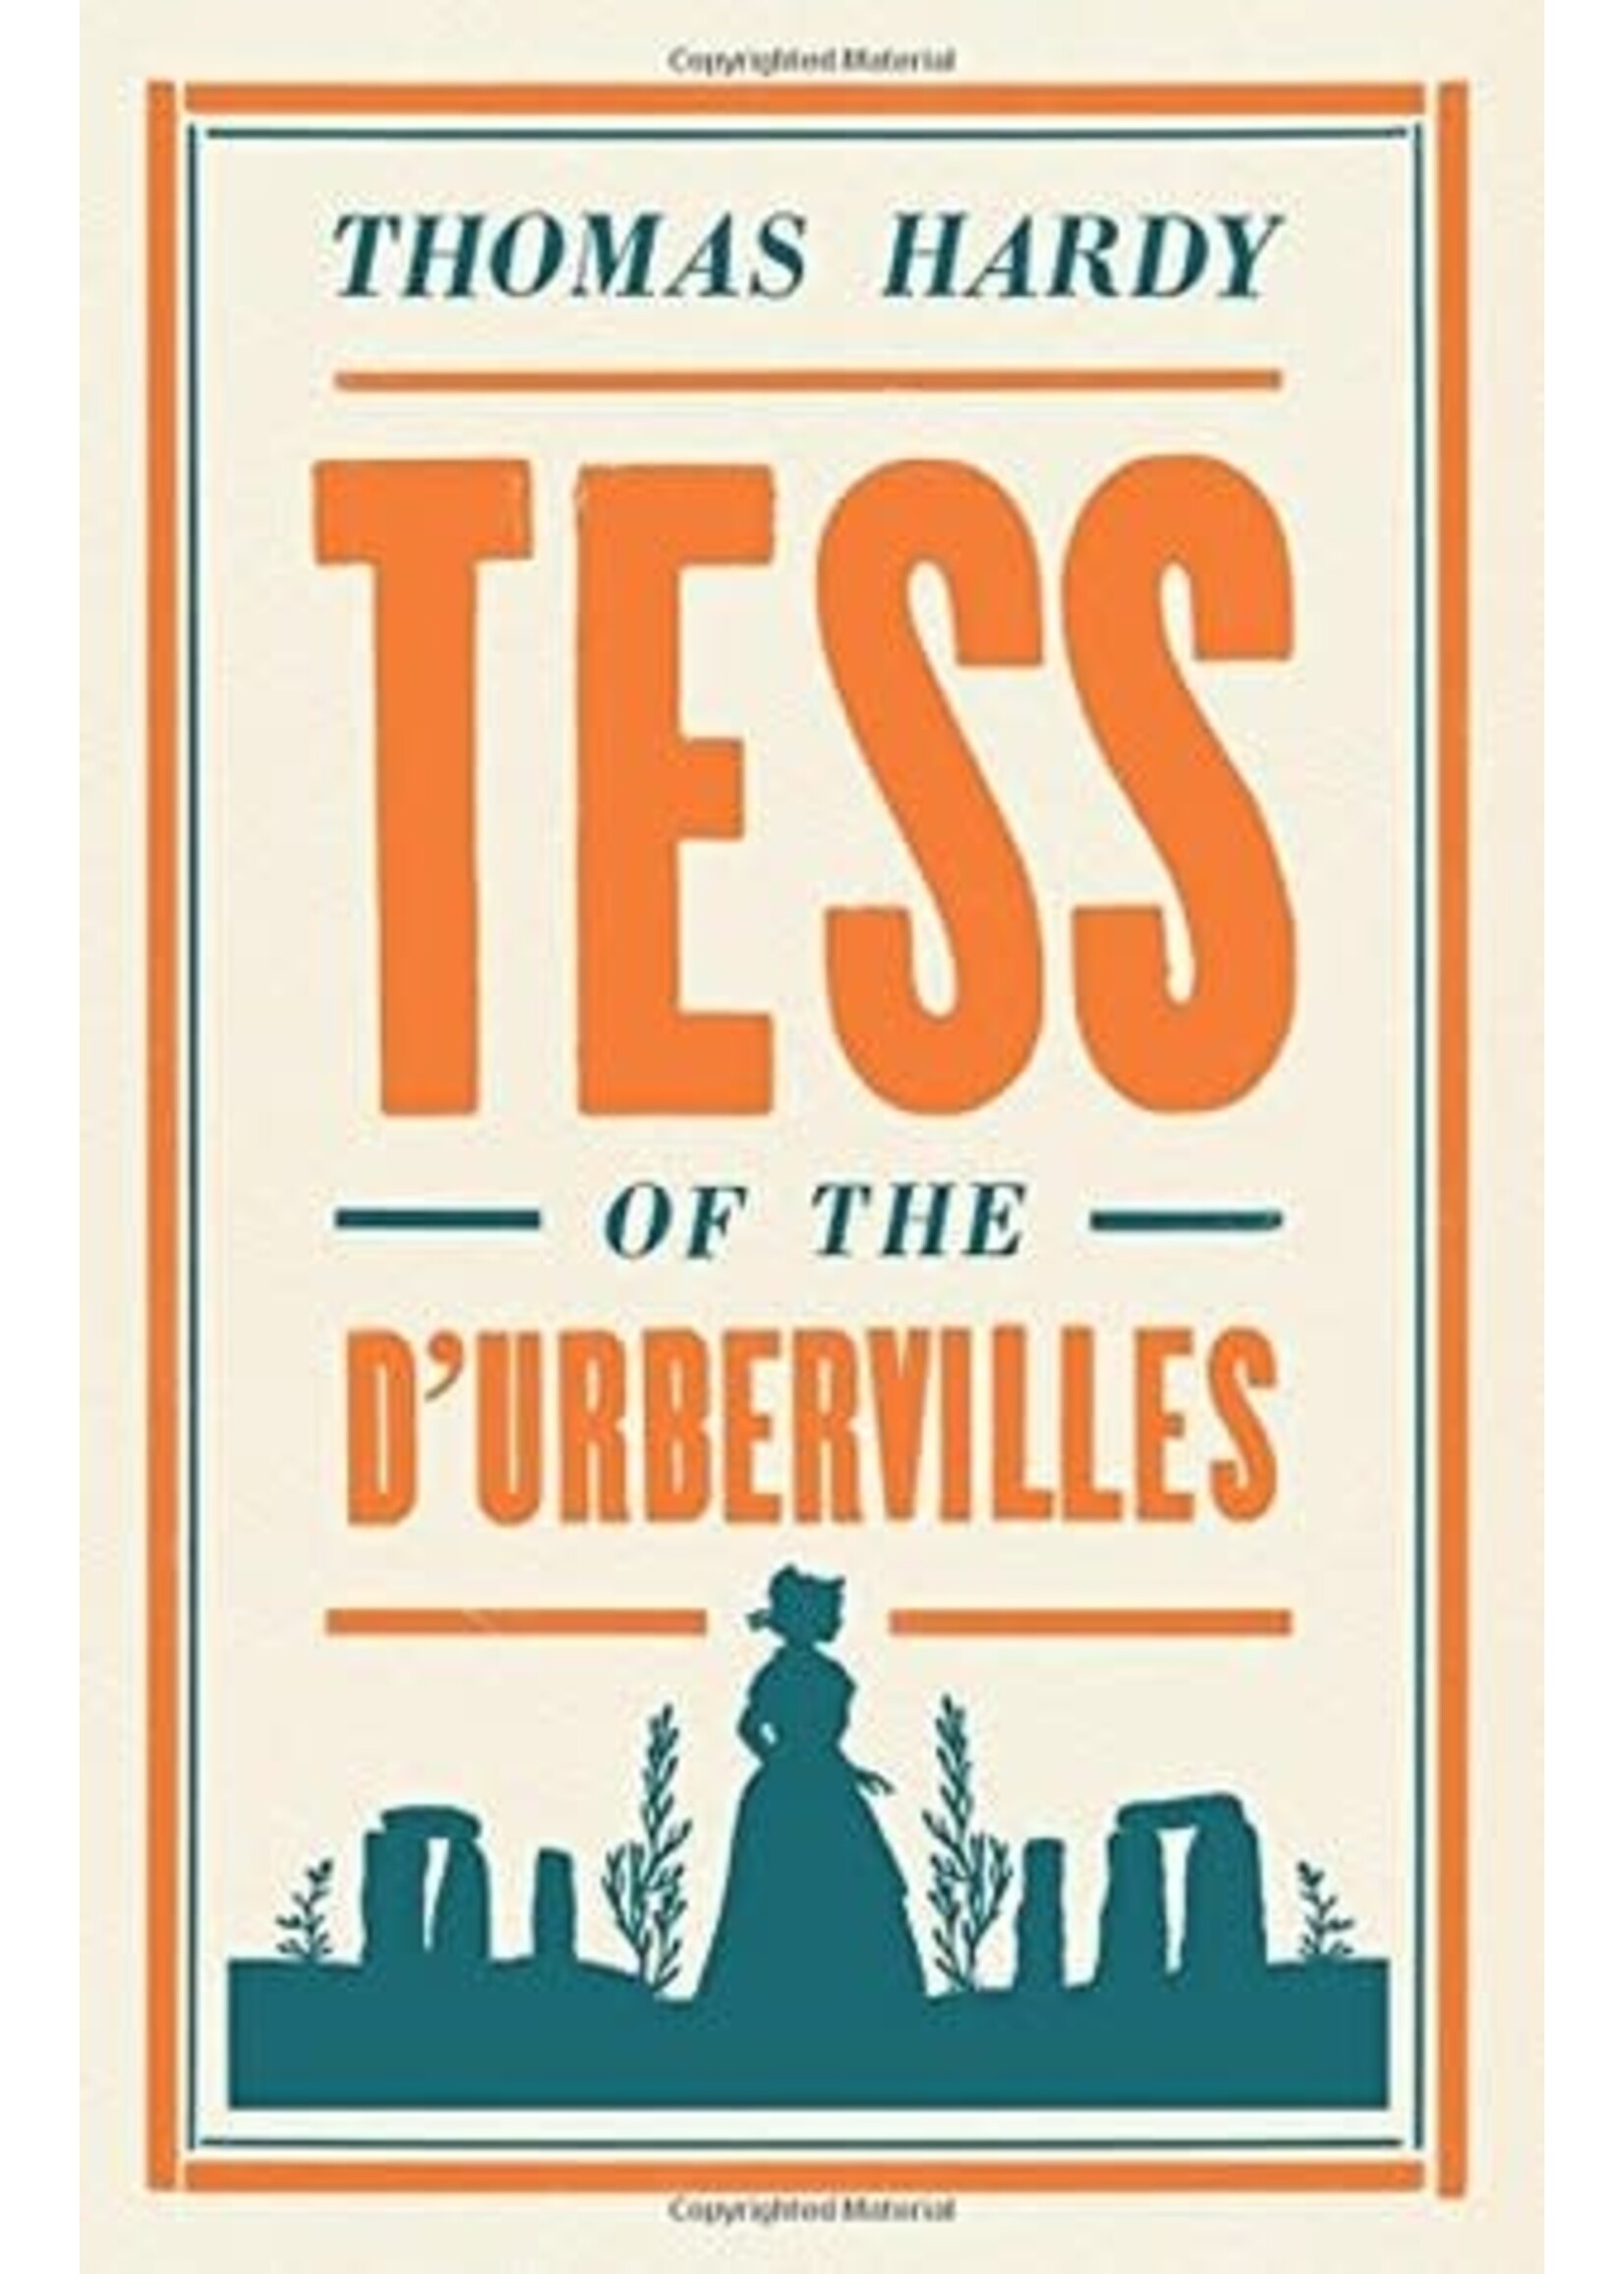 Tess of the d'Ubervilles by Thomas Hardy